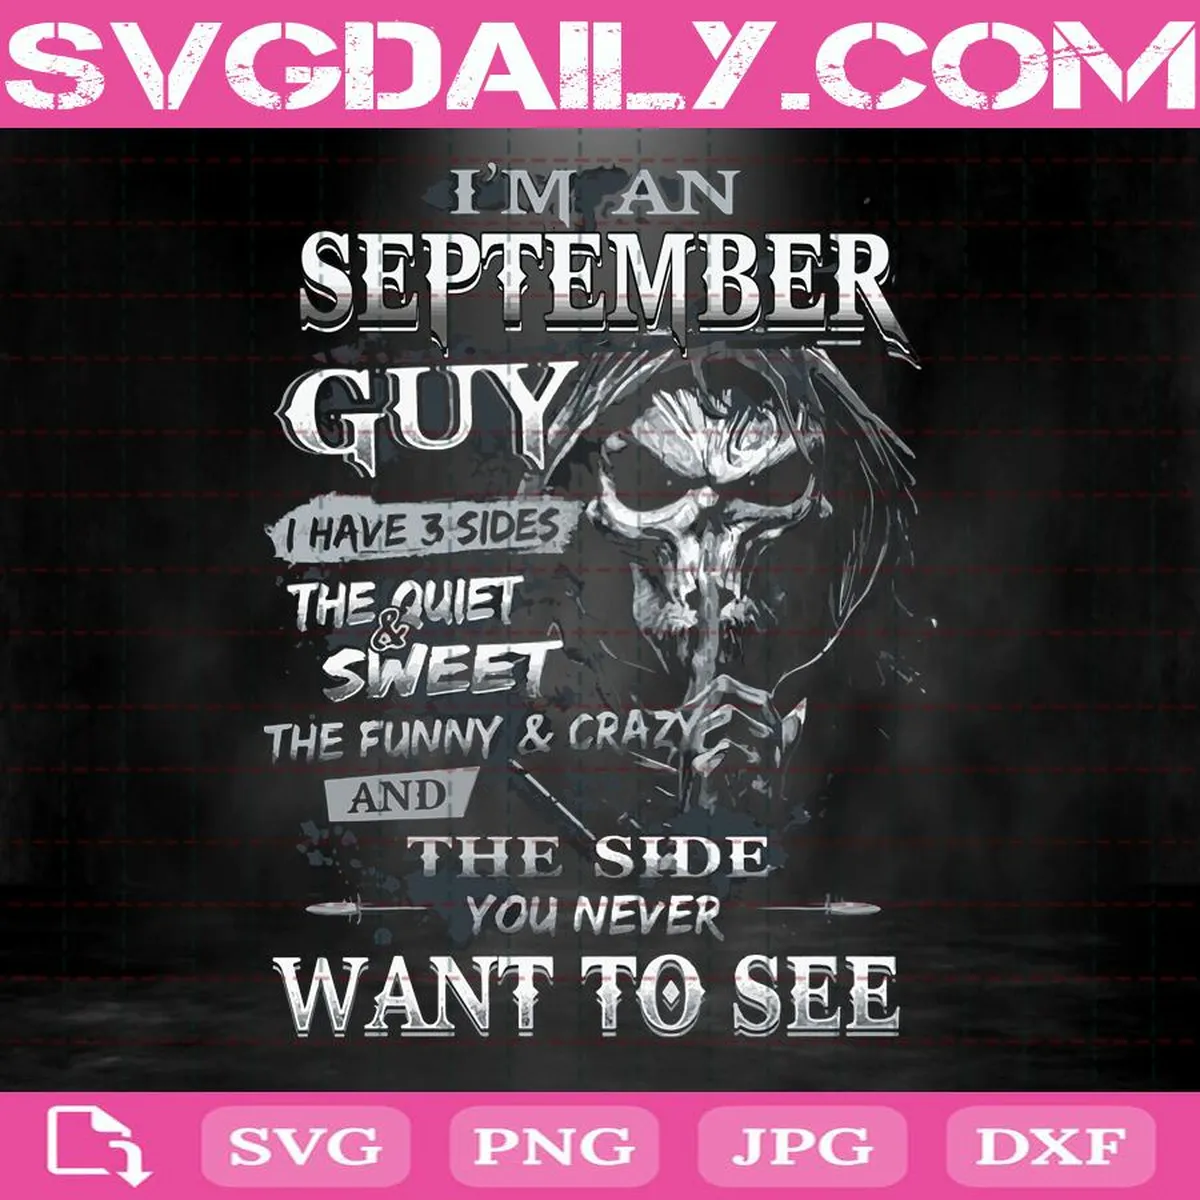 I'm An September Guy Skeleton Svg, I Have 3 Sides Sweet Funny And The Side You Never Want To See Svg, September Guy Svg, September Birthday Svg, Birthday Svg